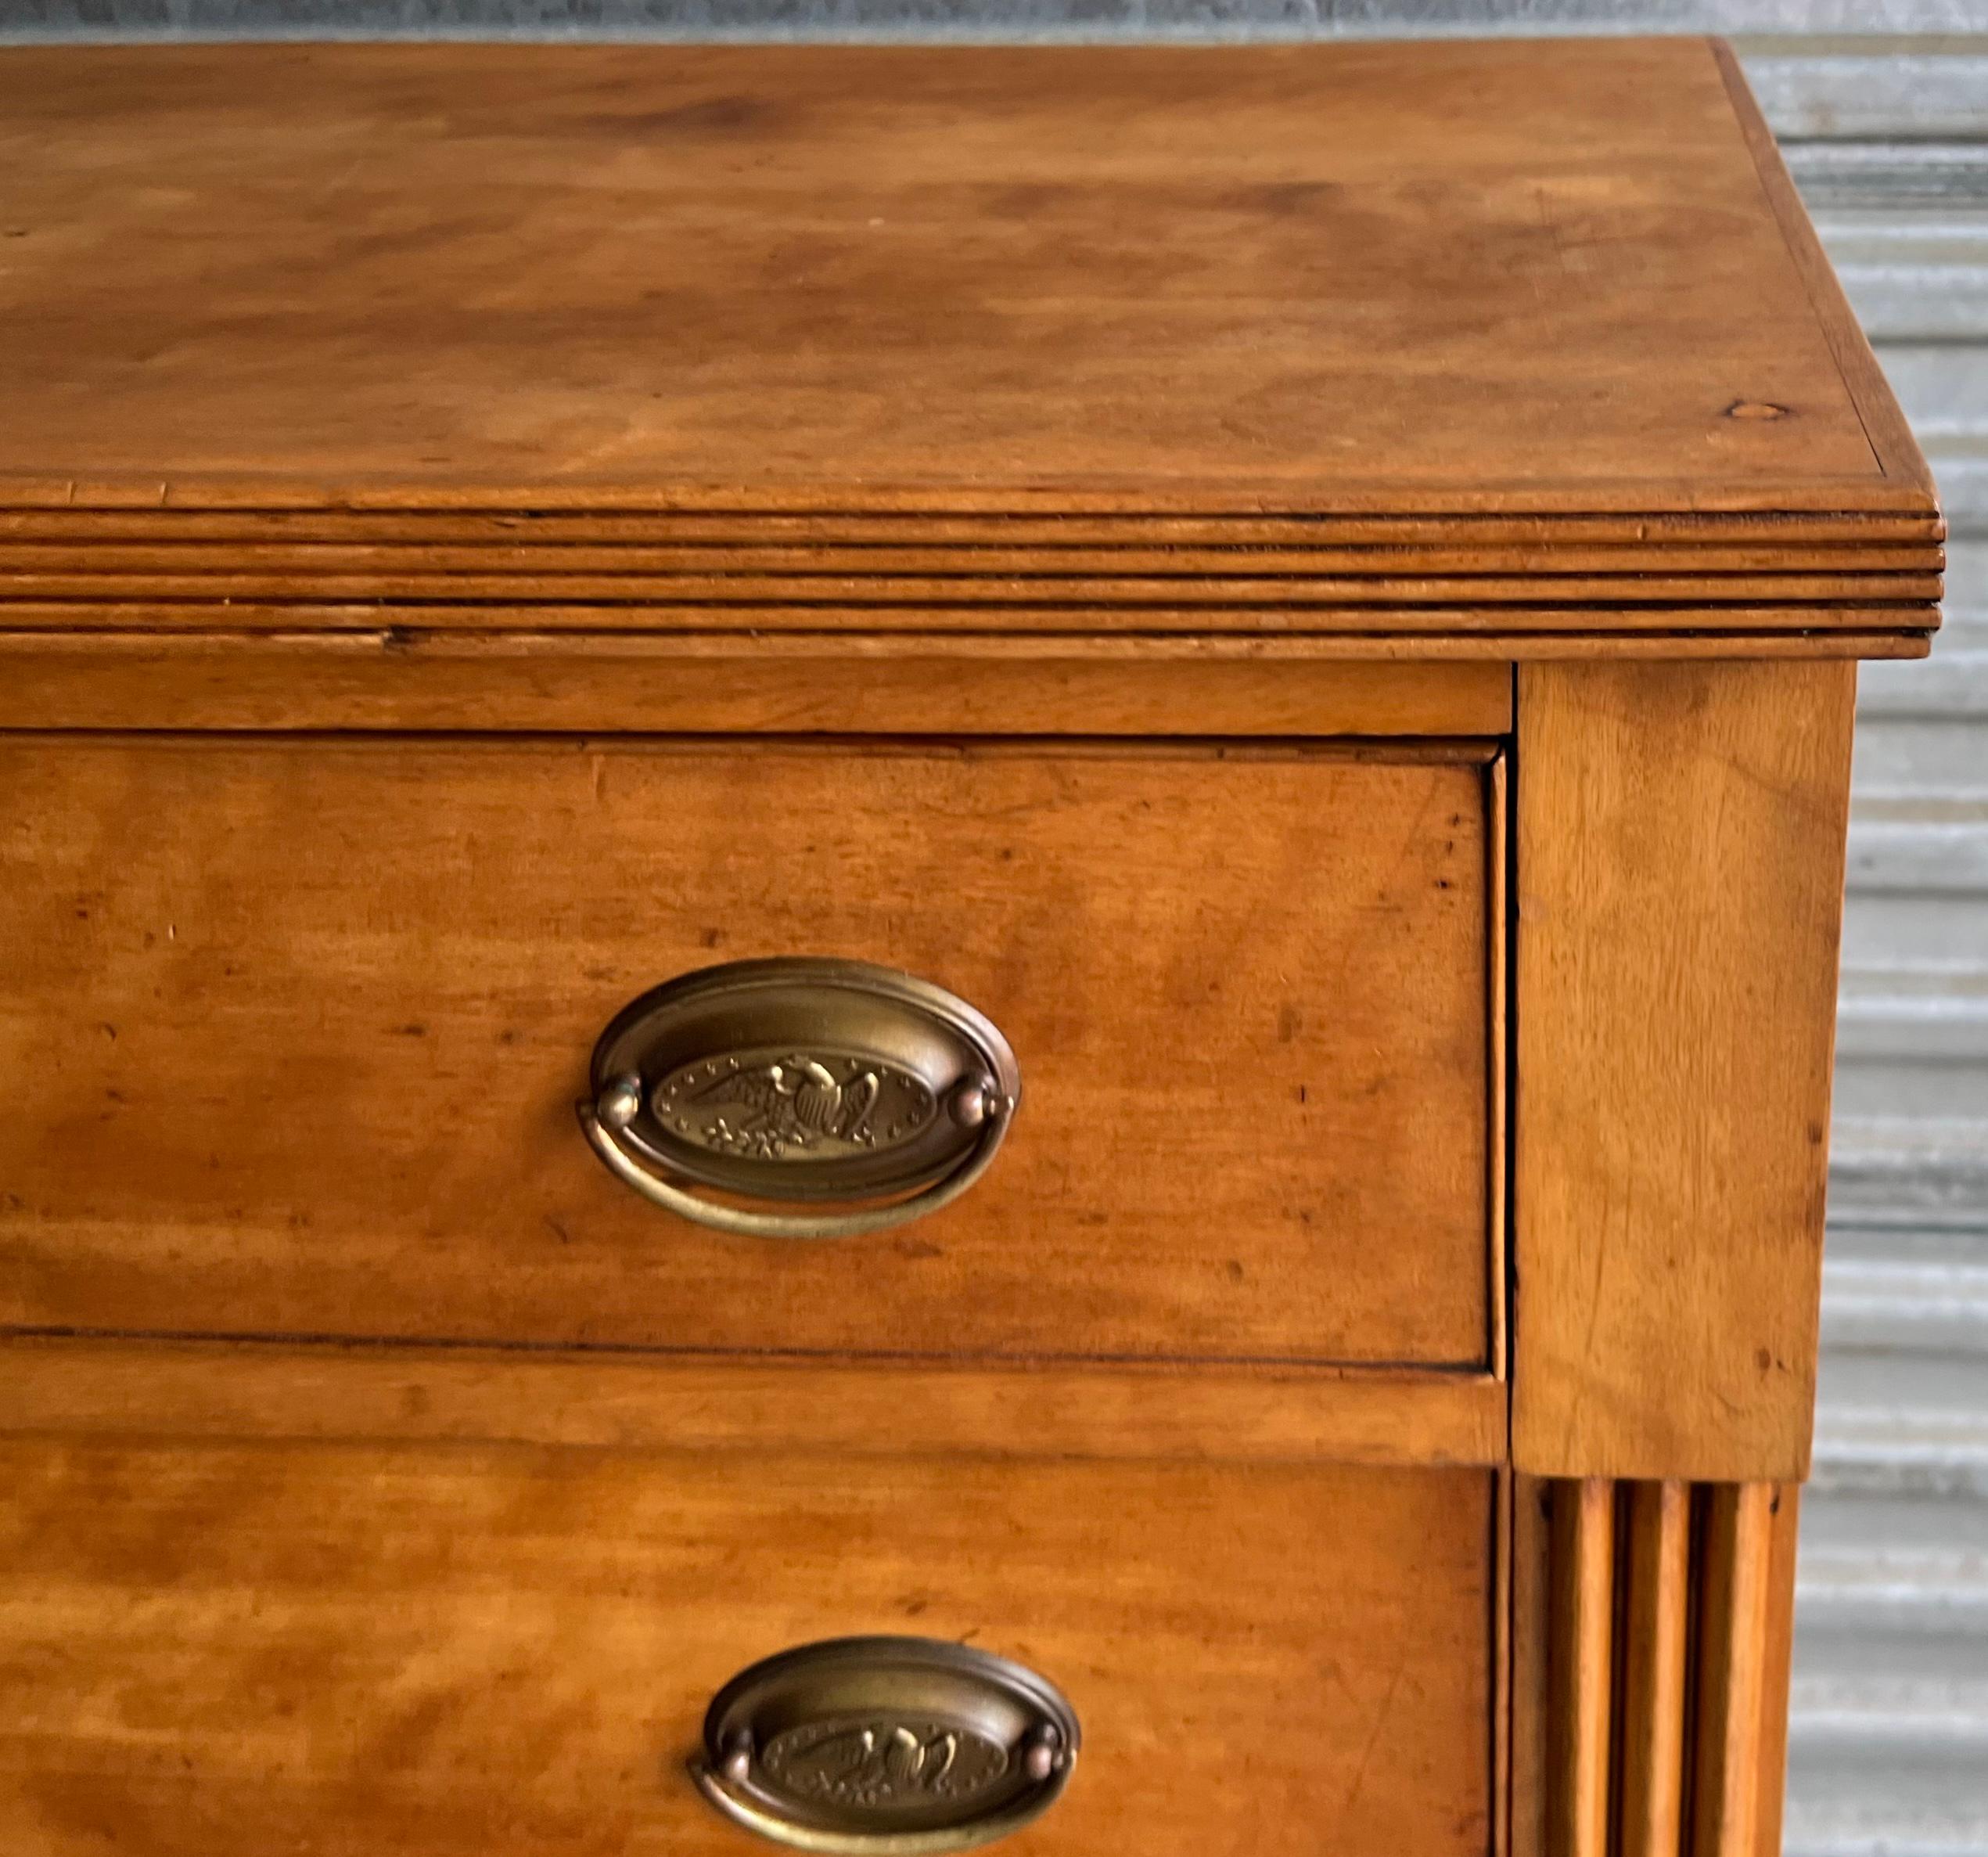 19th Century 19th-C. American Federal Style Tiger Maple Chest or Commode For Sale